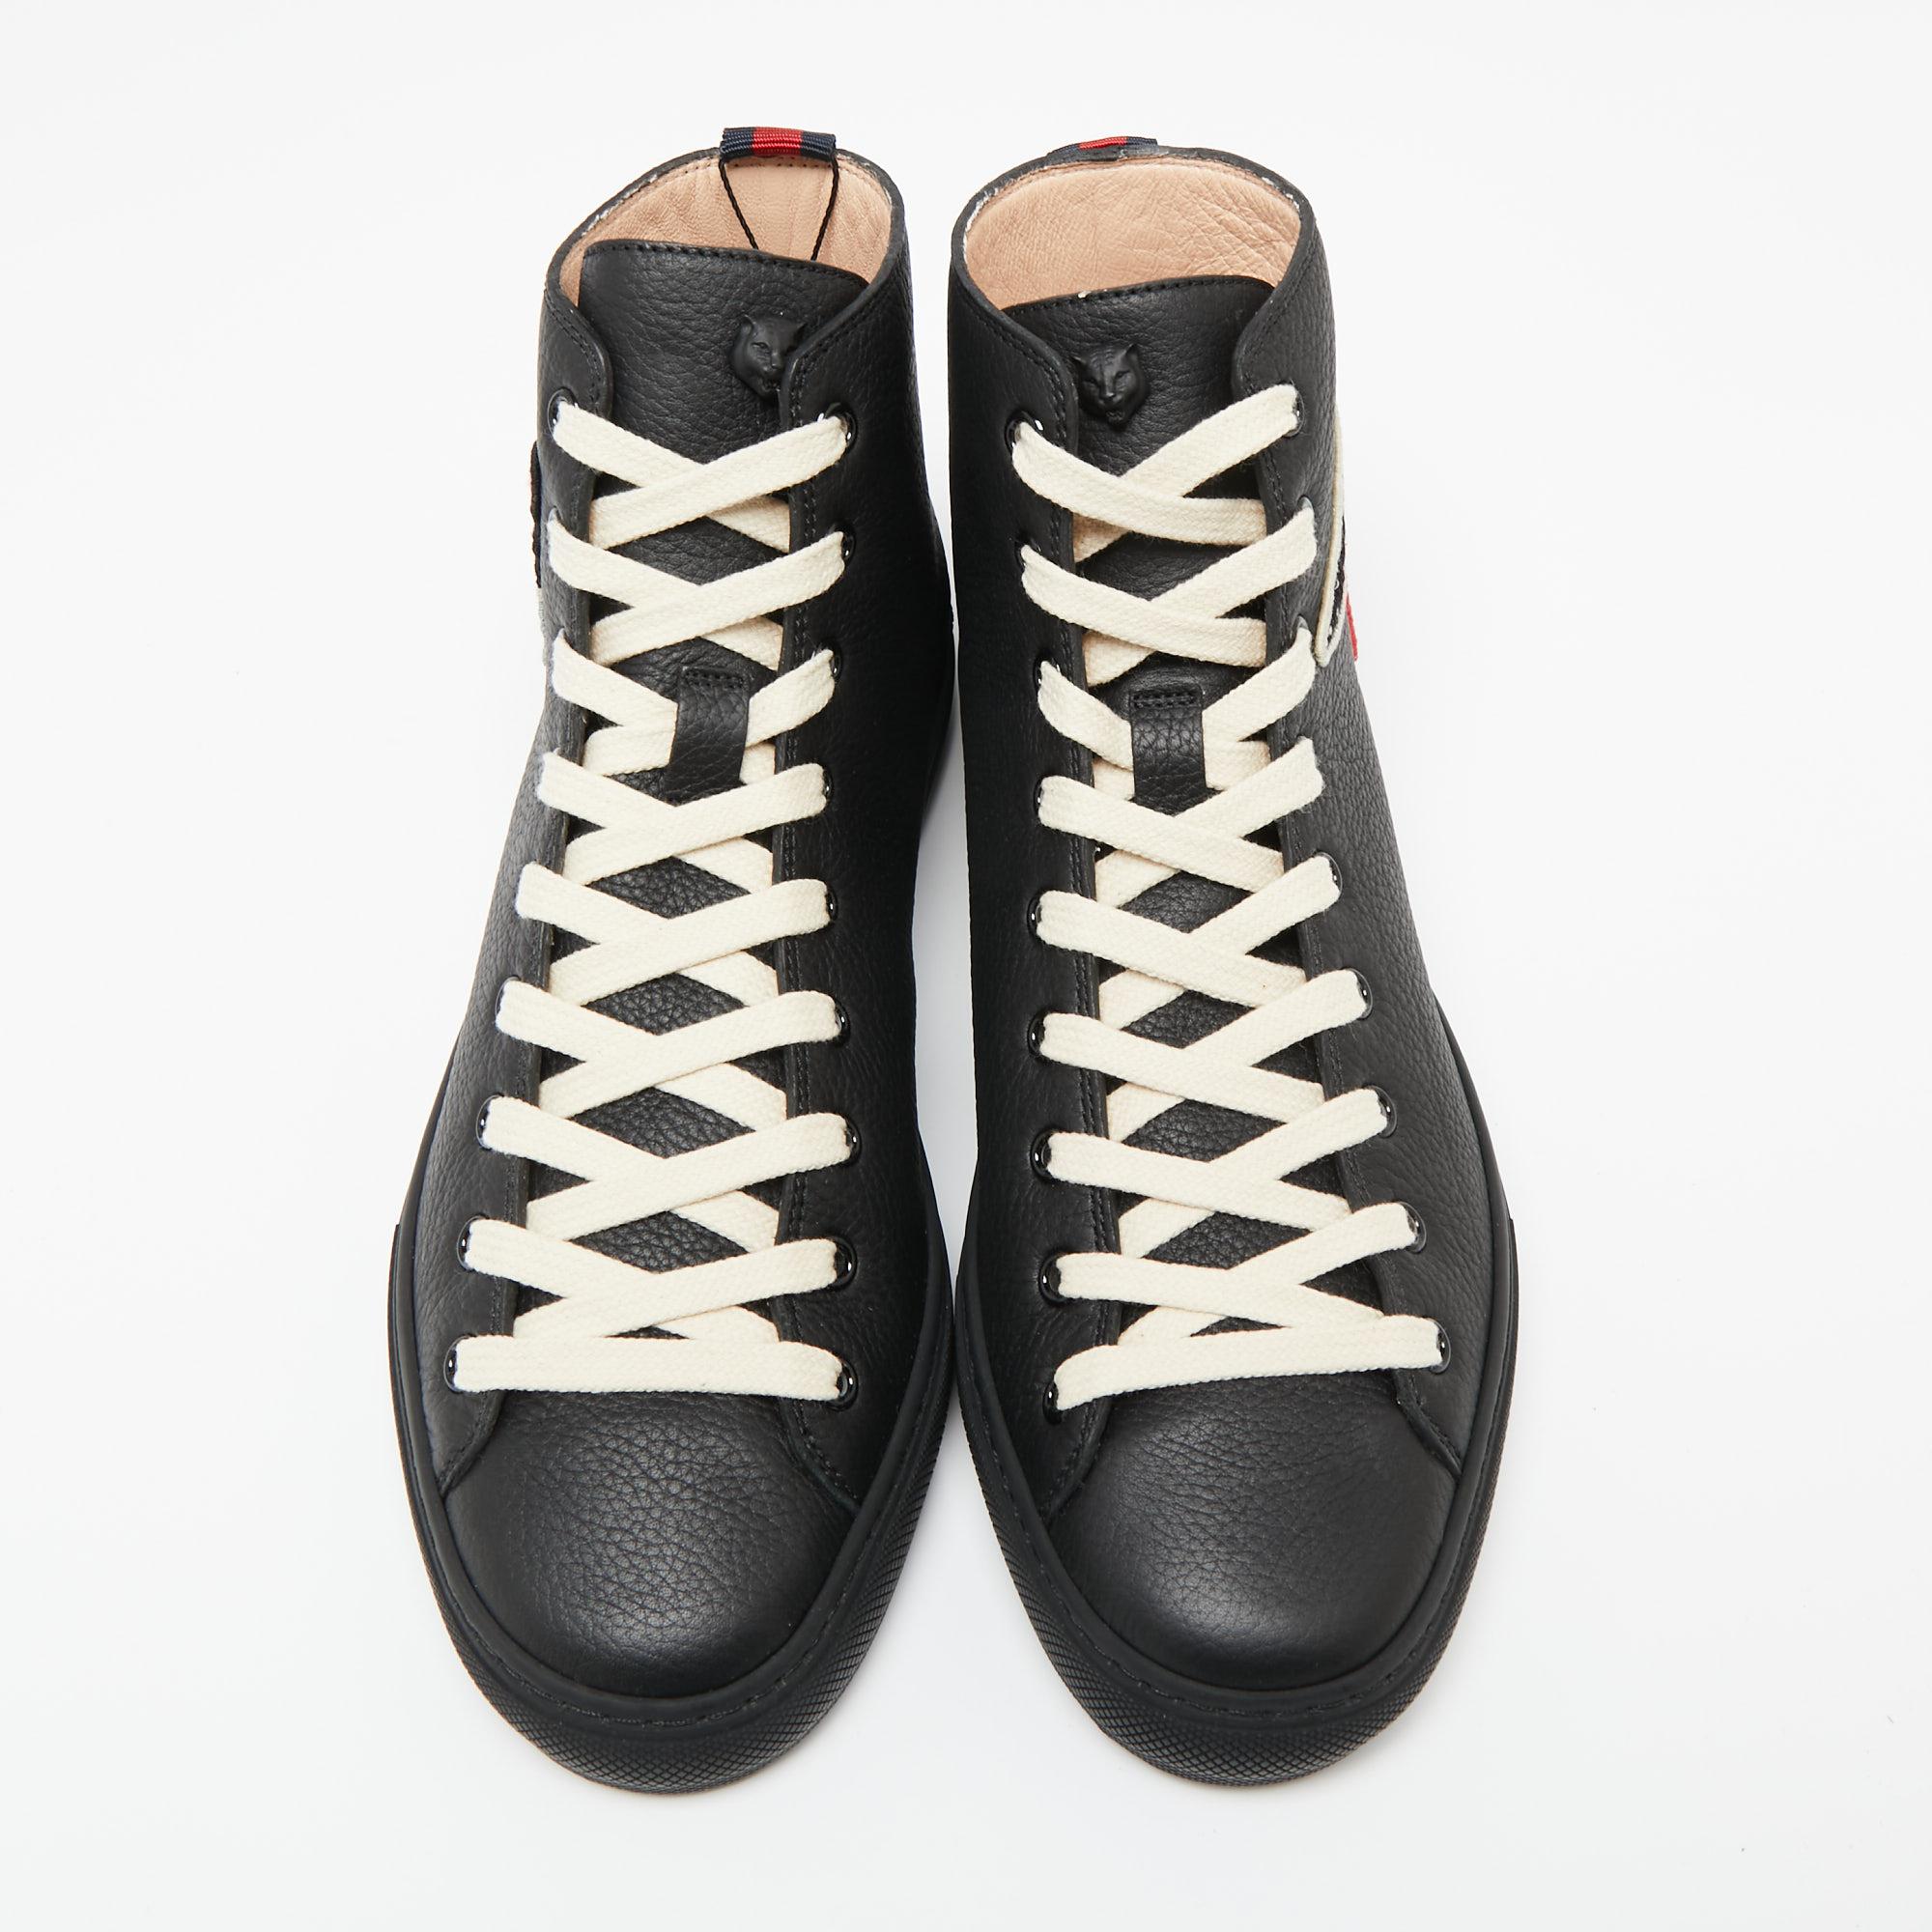 Black High Gucci Sneakers - 14 For Sale on 1stDibs | gucci high sneakers black, gucci high-top sneakers black, gucci black high top sneakers